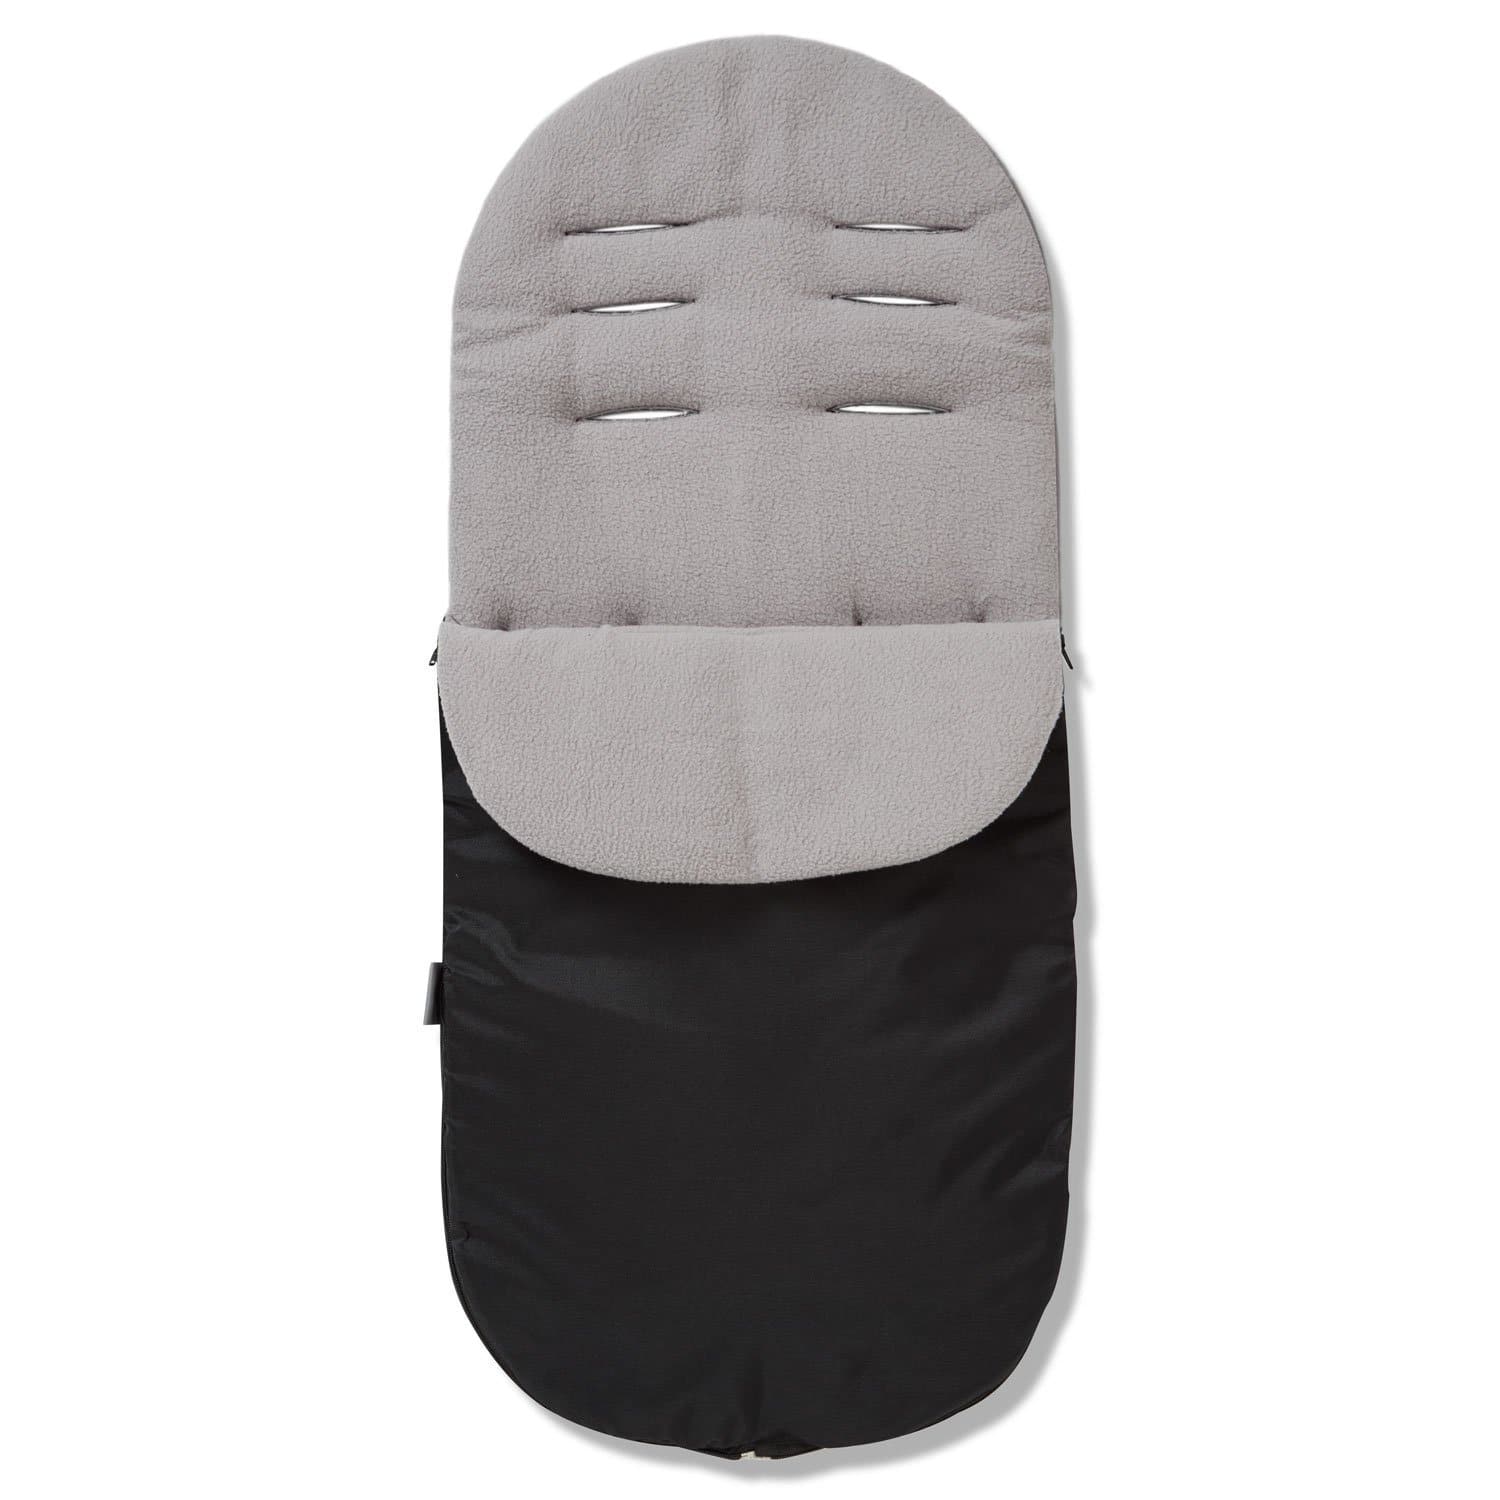 Footmuff / Cosy Toes Compatible with Red Castle - Grey / Fits All Models | For Your Little One